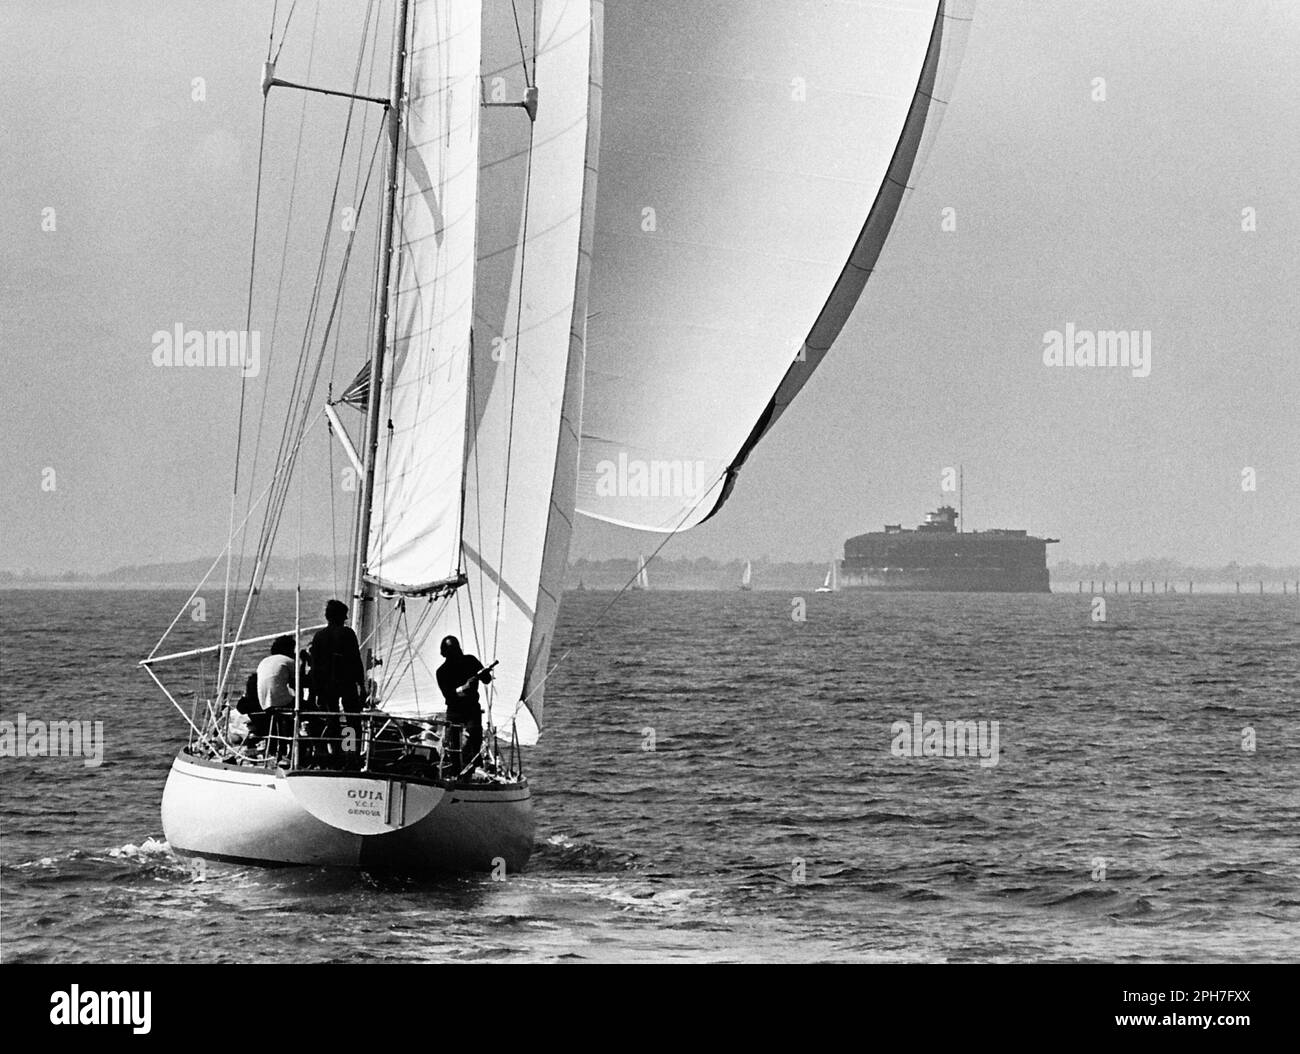 AJAX NEWS PHOTOS.  1974. PORTSMOUTH, ENGLAND. - WHITBREAD ROUND THE WORLD RACE - END - ITALIAN YACHT GUIA SKIPPERED BY GIORGIO FALCK HEADS FOR THE FINISHING LINE OFF SOUTHSEA FLYING KITE FROM AUS YACHT GINKO. PHOTO: JONATHAN EASTLAND/AJAX REF:MX340 220605 103 Stock Photo